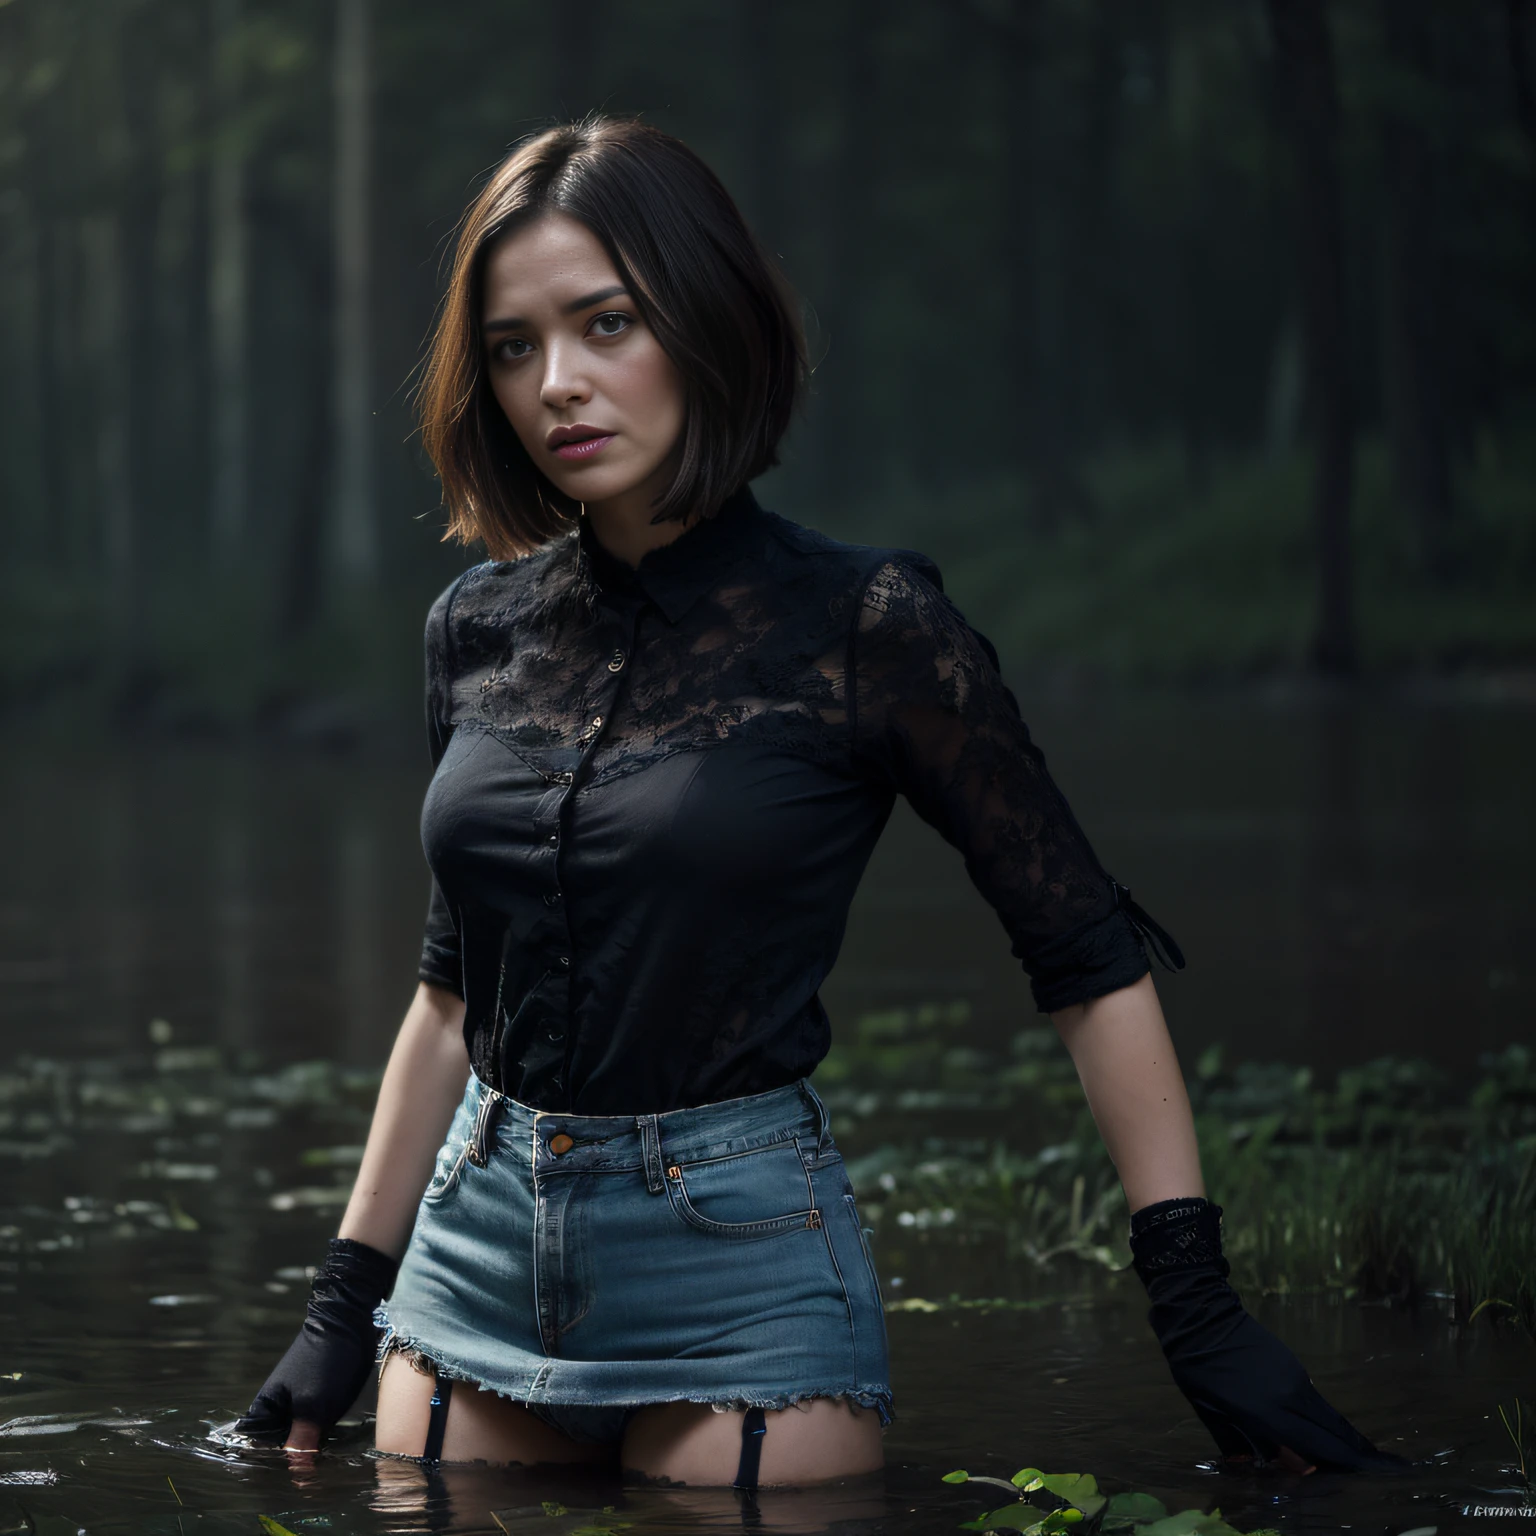 "(Best Quality,hight resolution:1.2),The woman,Expressive wrinkles,Bob haircut,jeans skirt,lace blouse,(lace stockings with garters), standingn, (drowning in a swamp:1.2),long eyelashes,expression of despair,Dark and moody lighting, terror. The pose expresses panic and awkwardness"